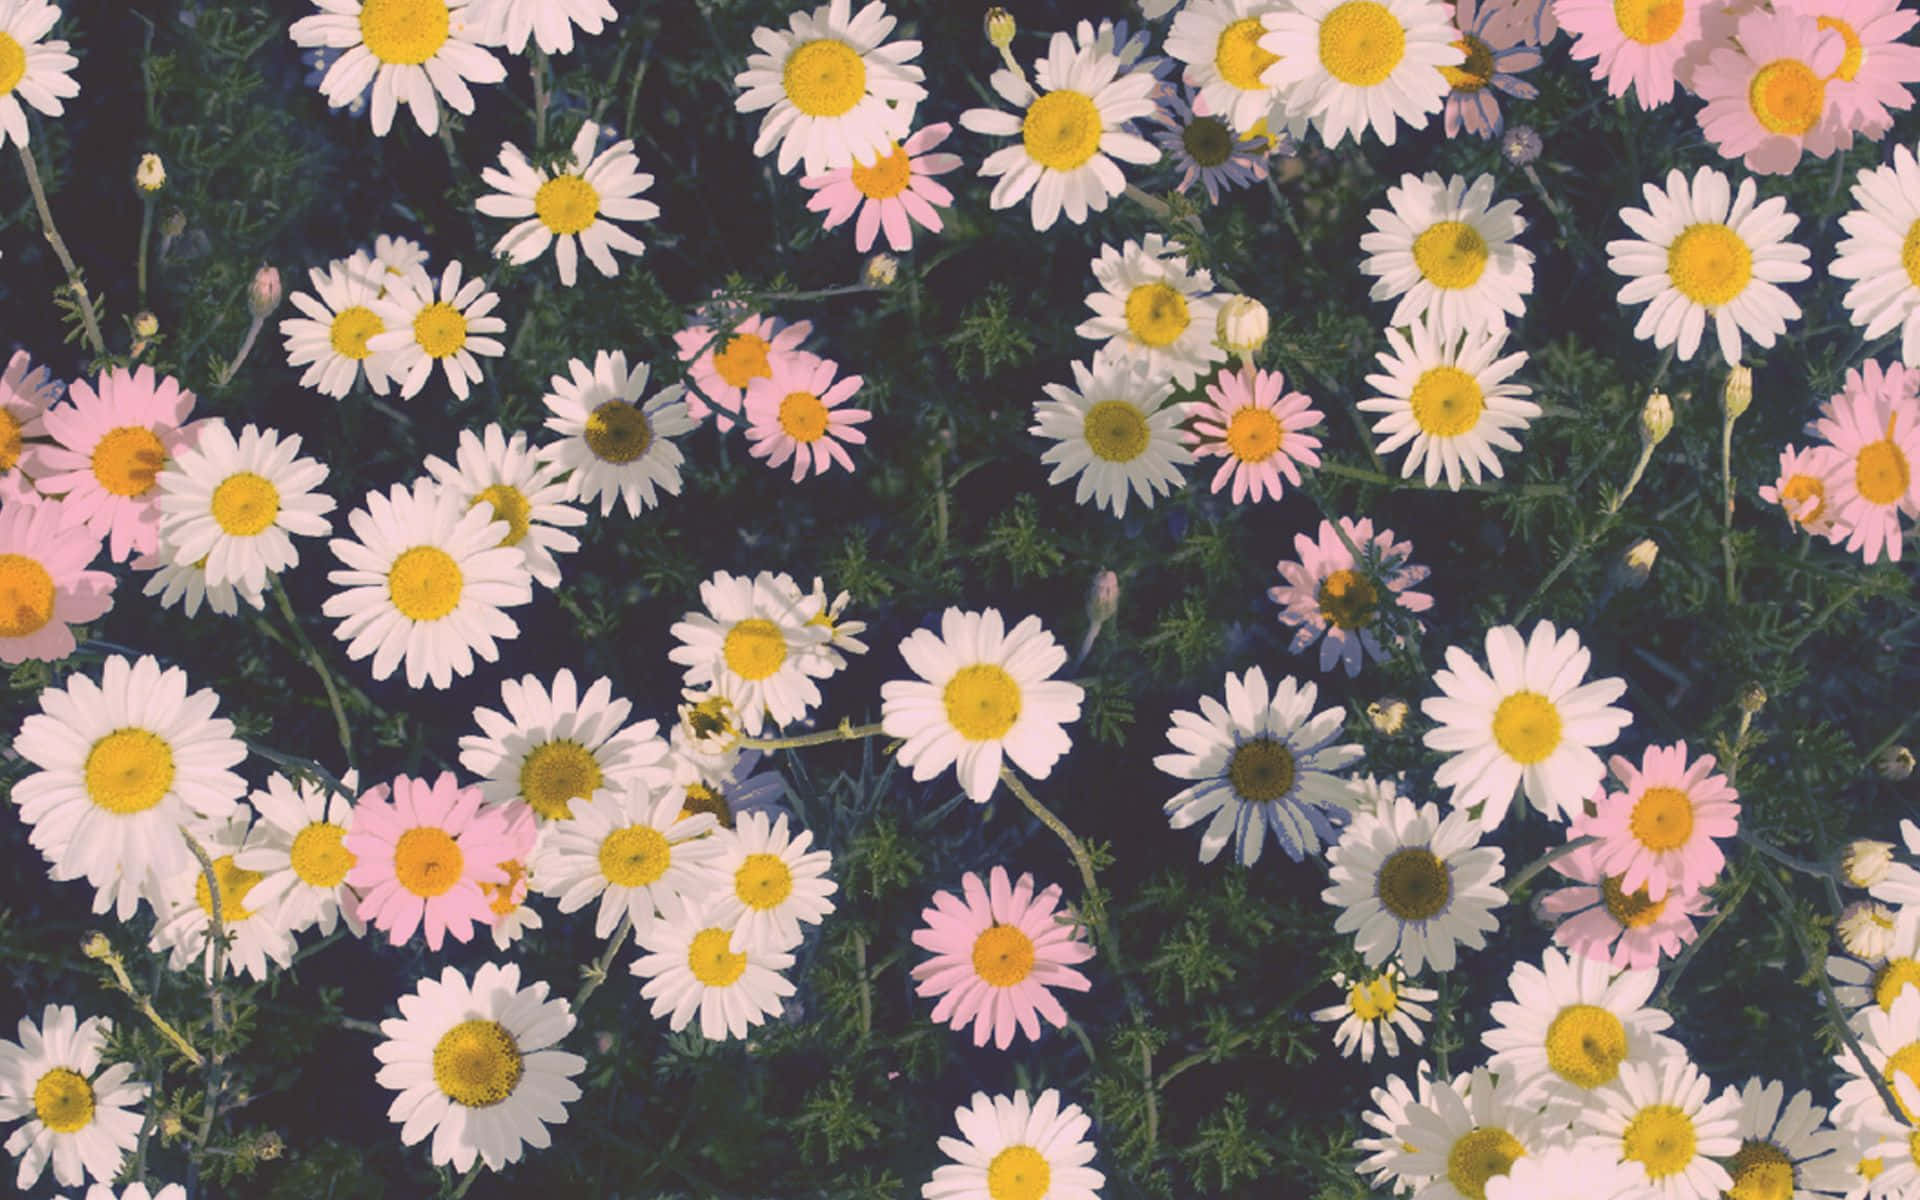 a field of daisies with pink and white flowers